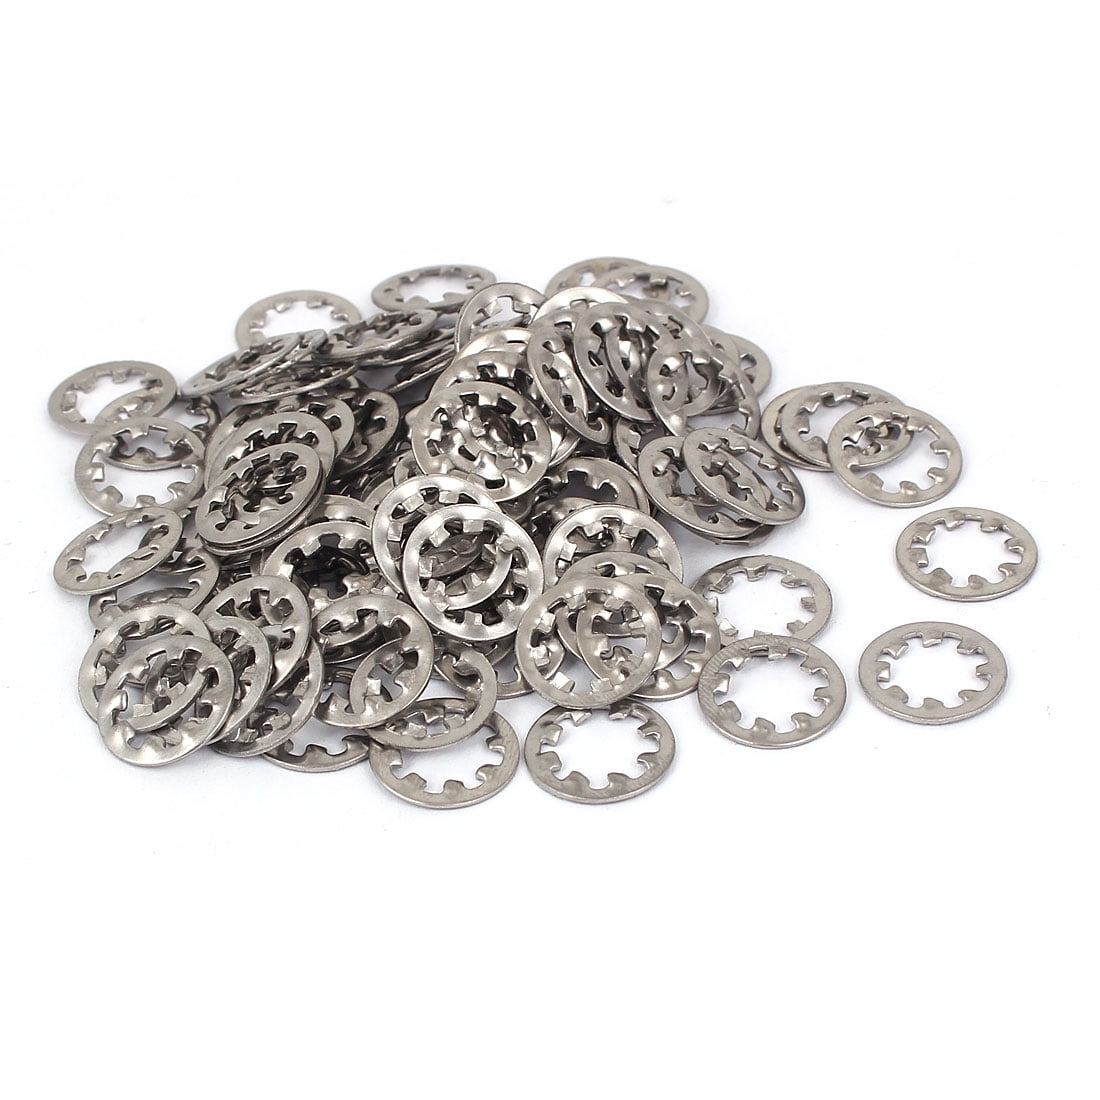 Internal Tooth Star Lock Washers M3 to M10 Stainless Steel Silver Tone 100 Pcs 